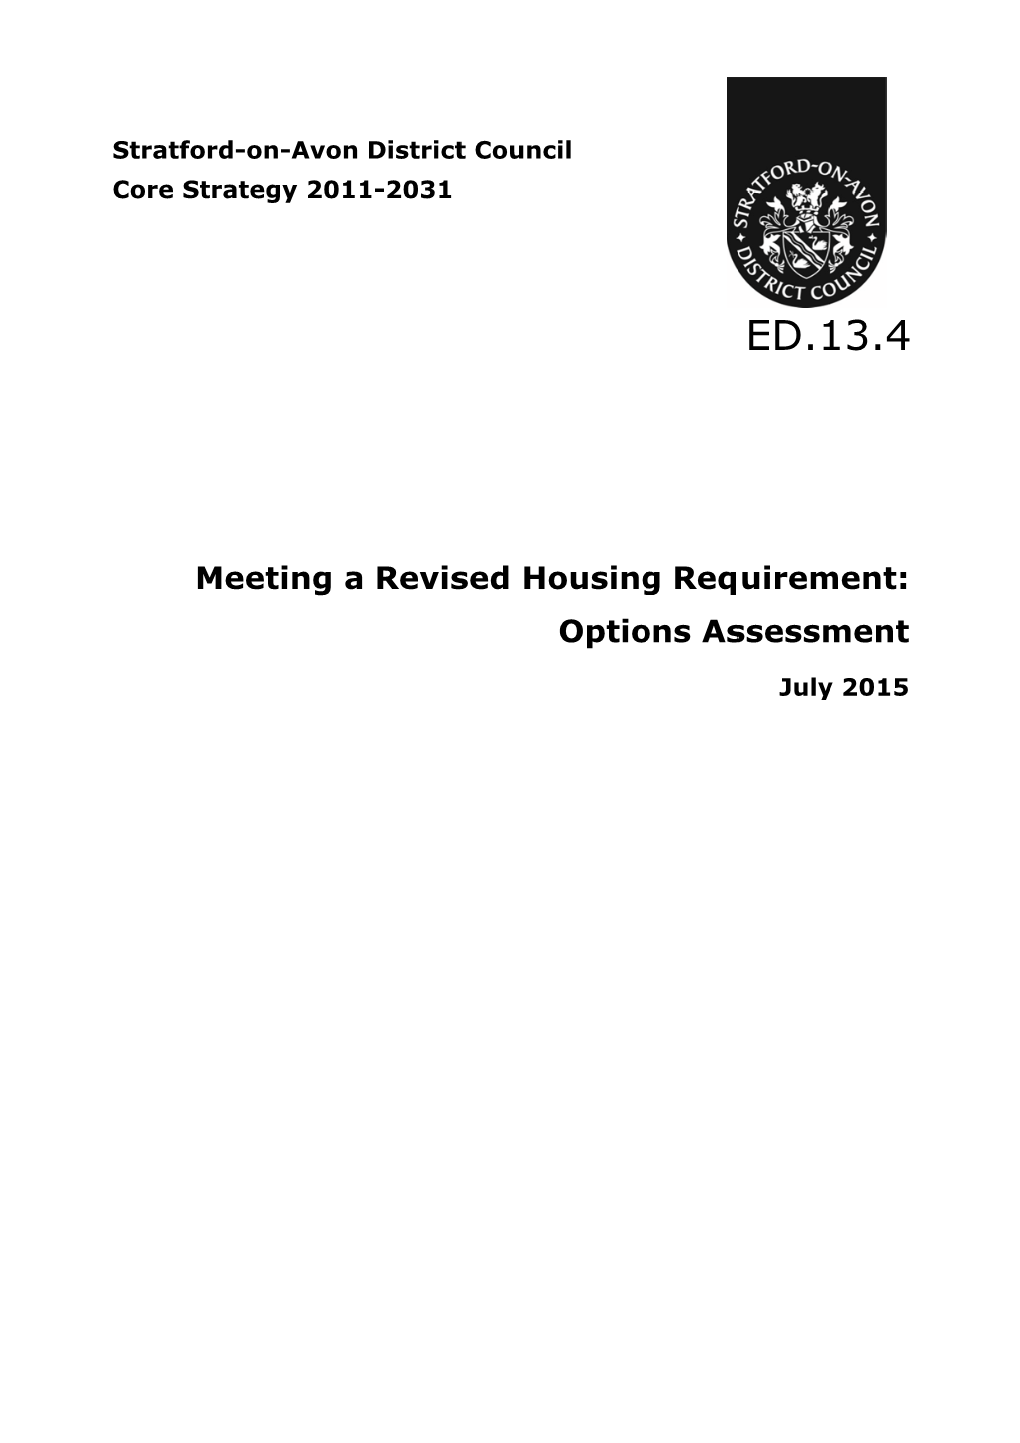 Meeting a Revised Housing Requirement: Options Assessment